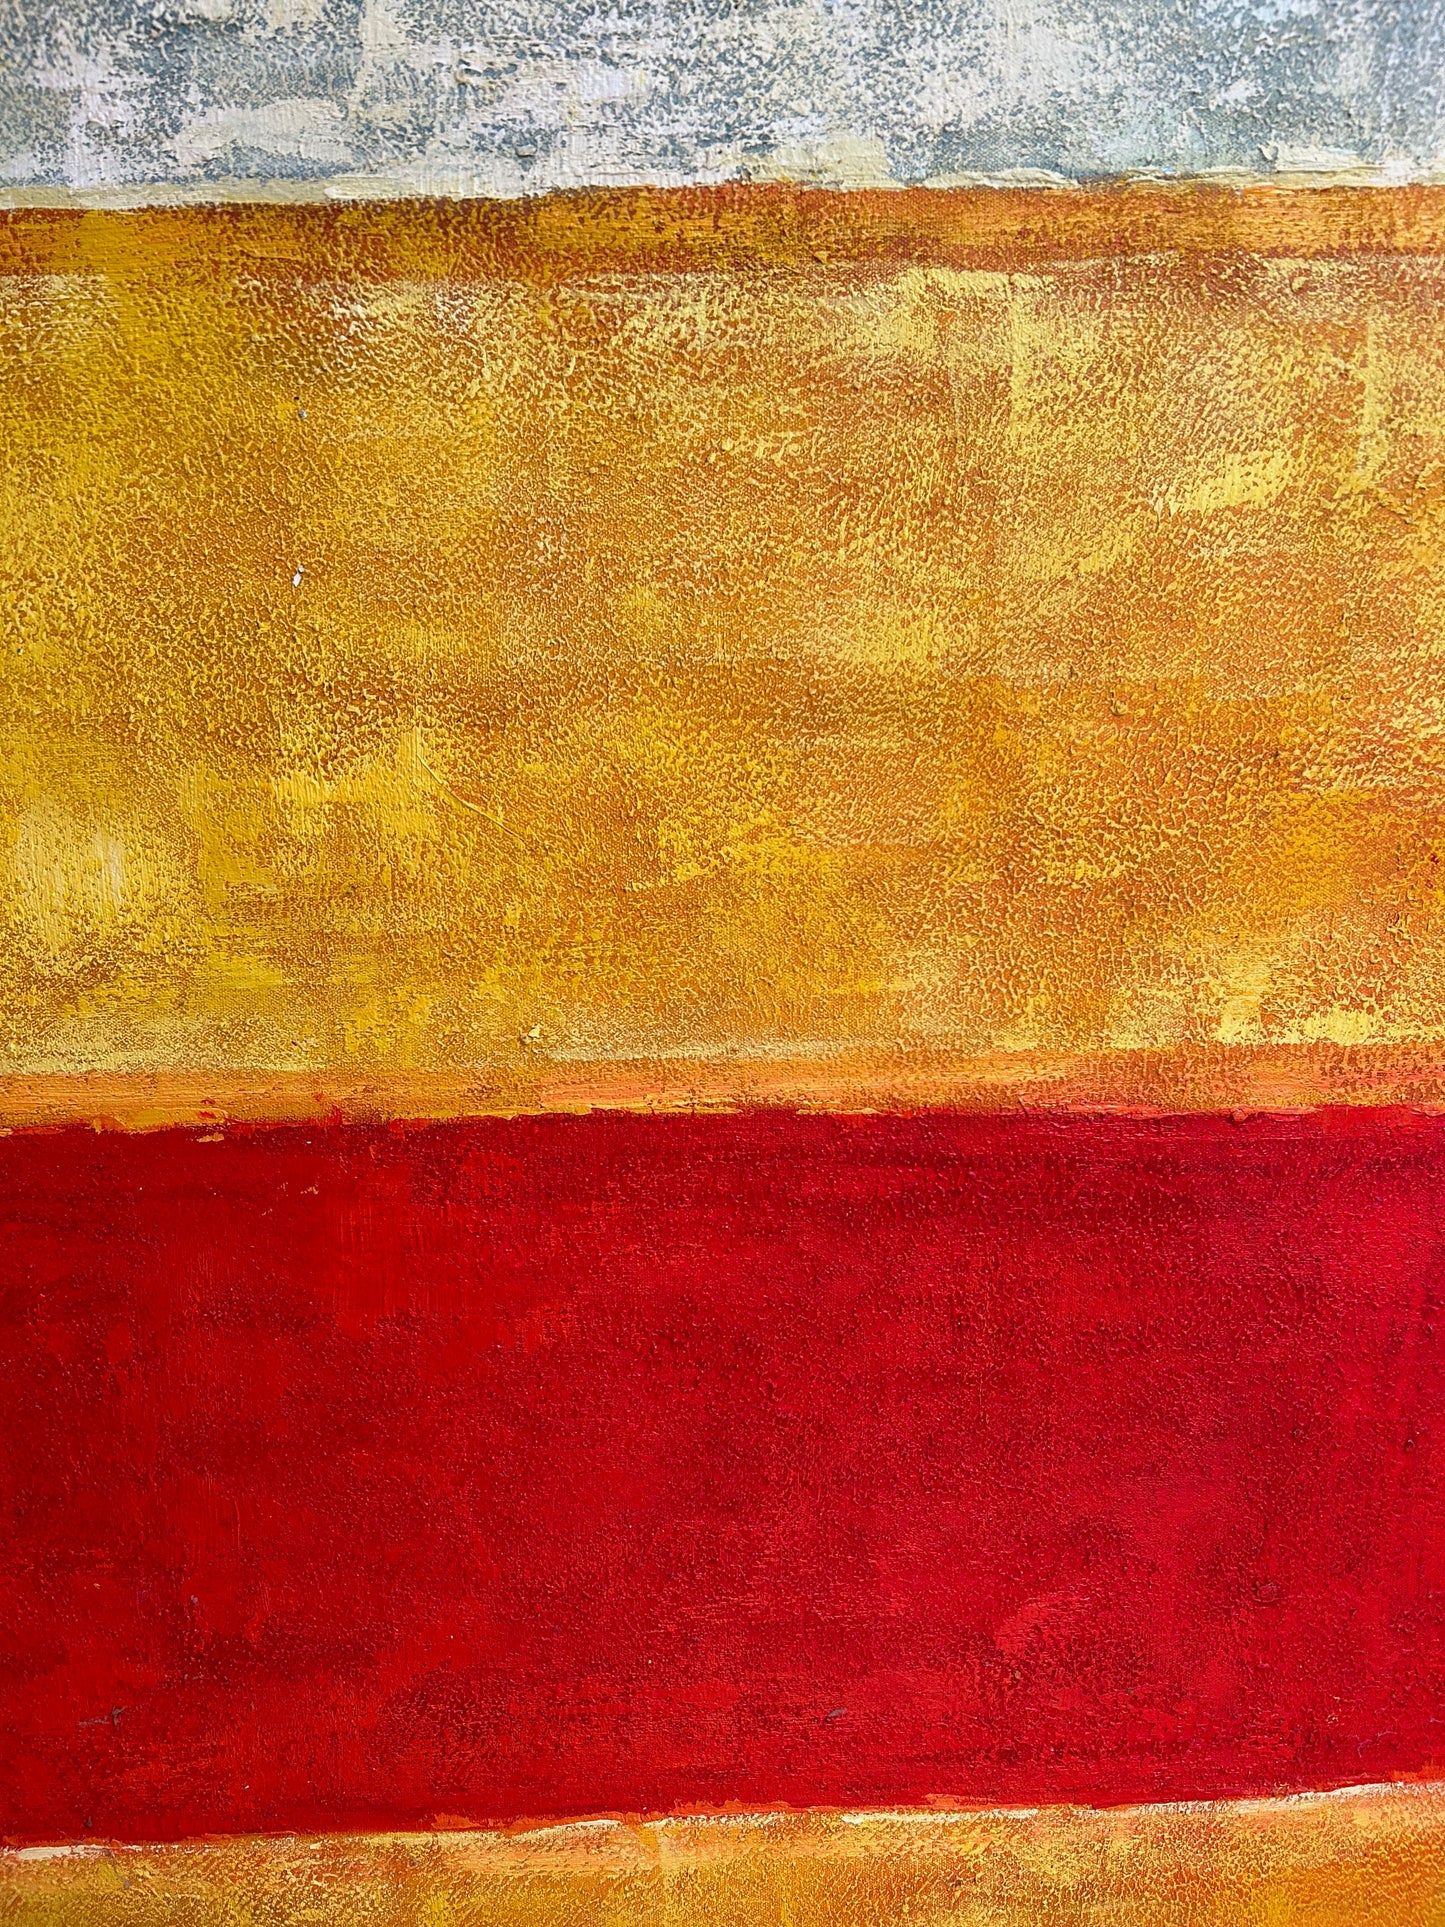 Colourful Abstract in the style of Mark Rothko